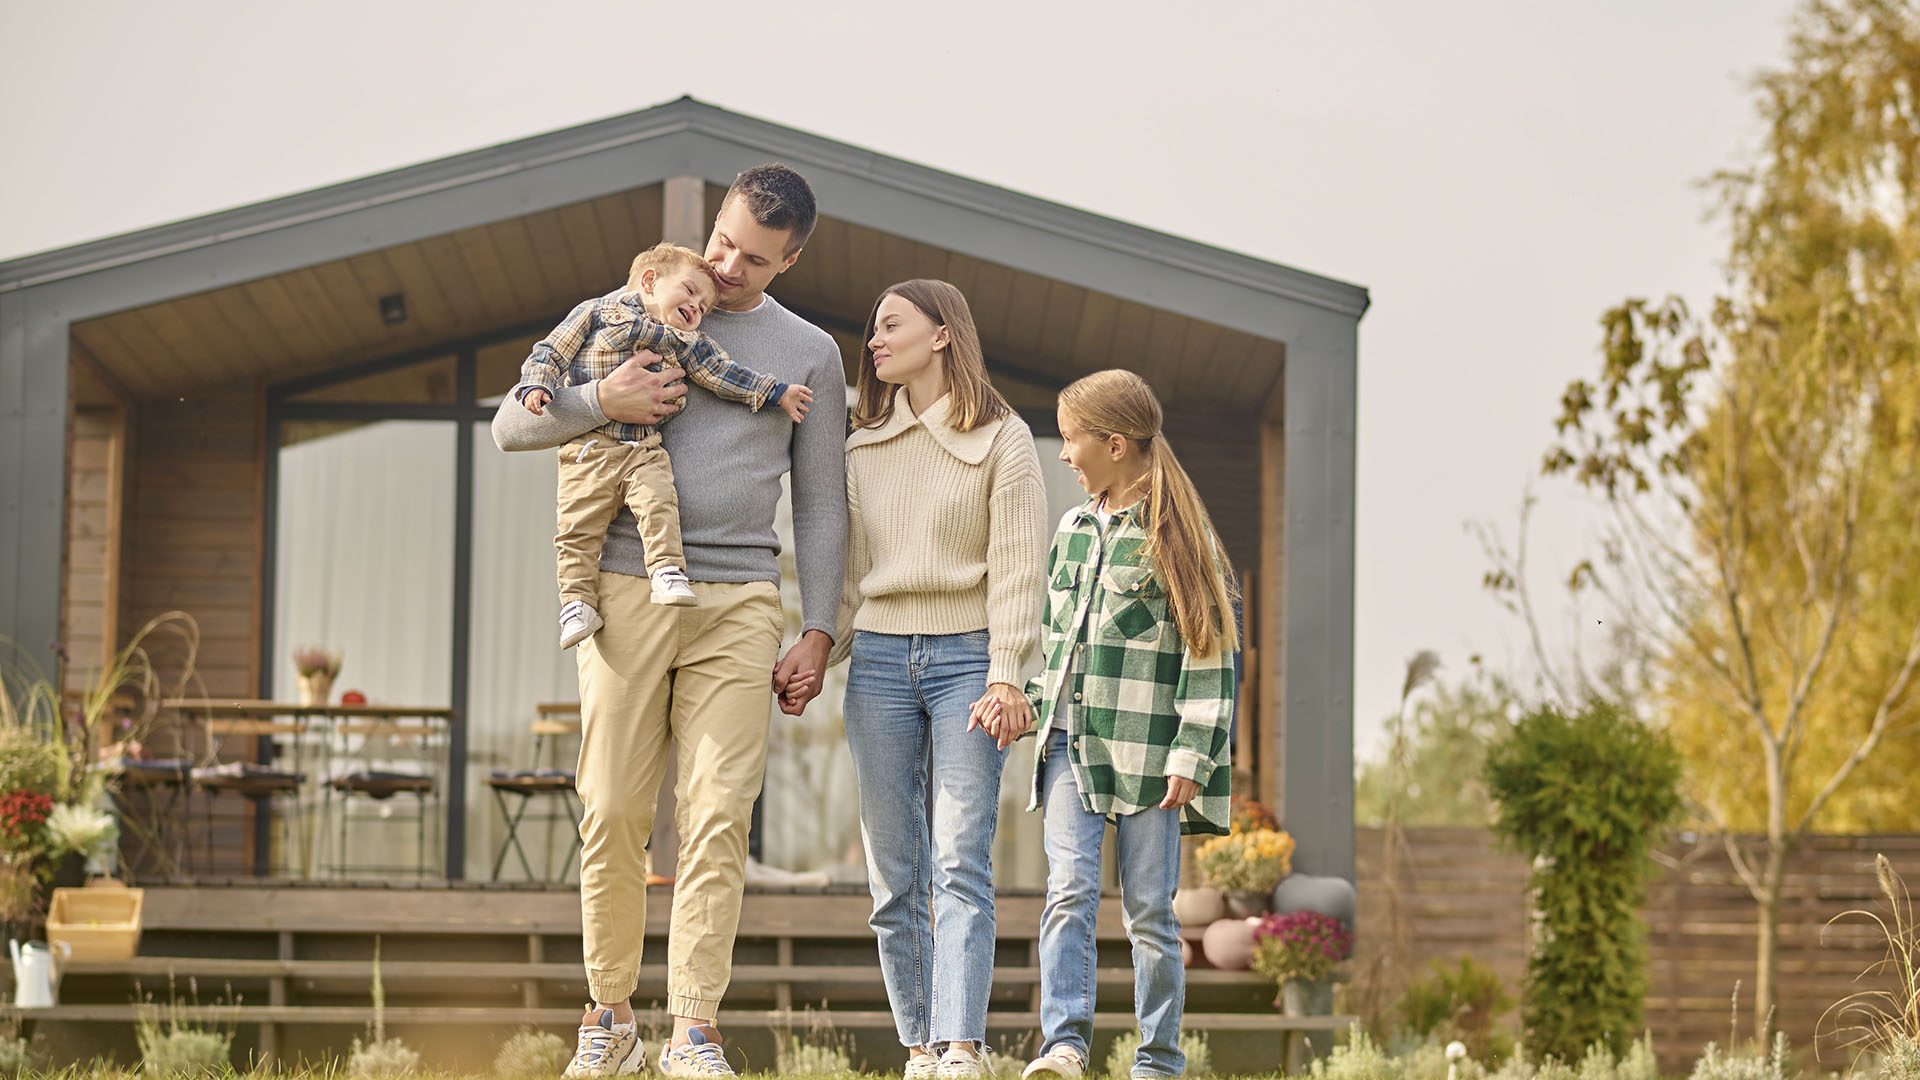 A family of four stands in front of a modern house, exemplifying the dream of homeownership. The father holds a toddler, the mother stands next to him holding his hand, and an older child stands beside them. Is renting ruining your future? Consider taking the next step towards owning your own home.